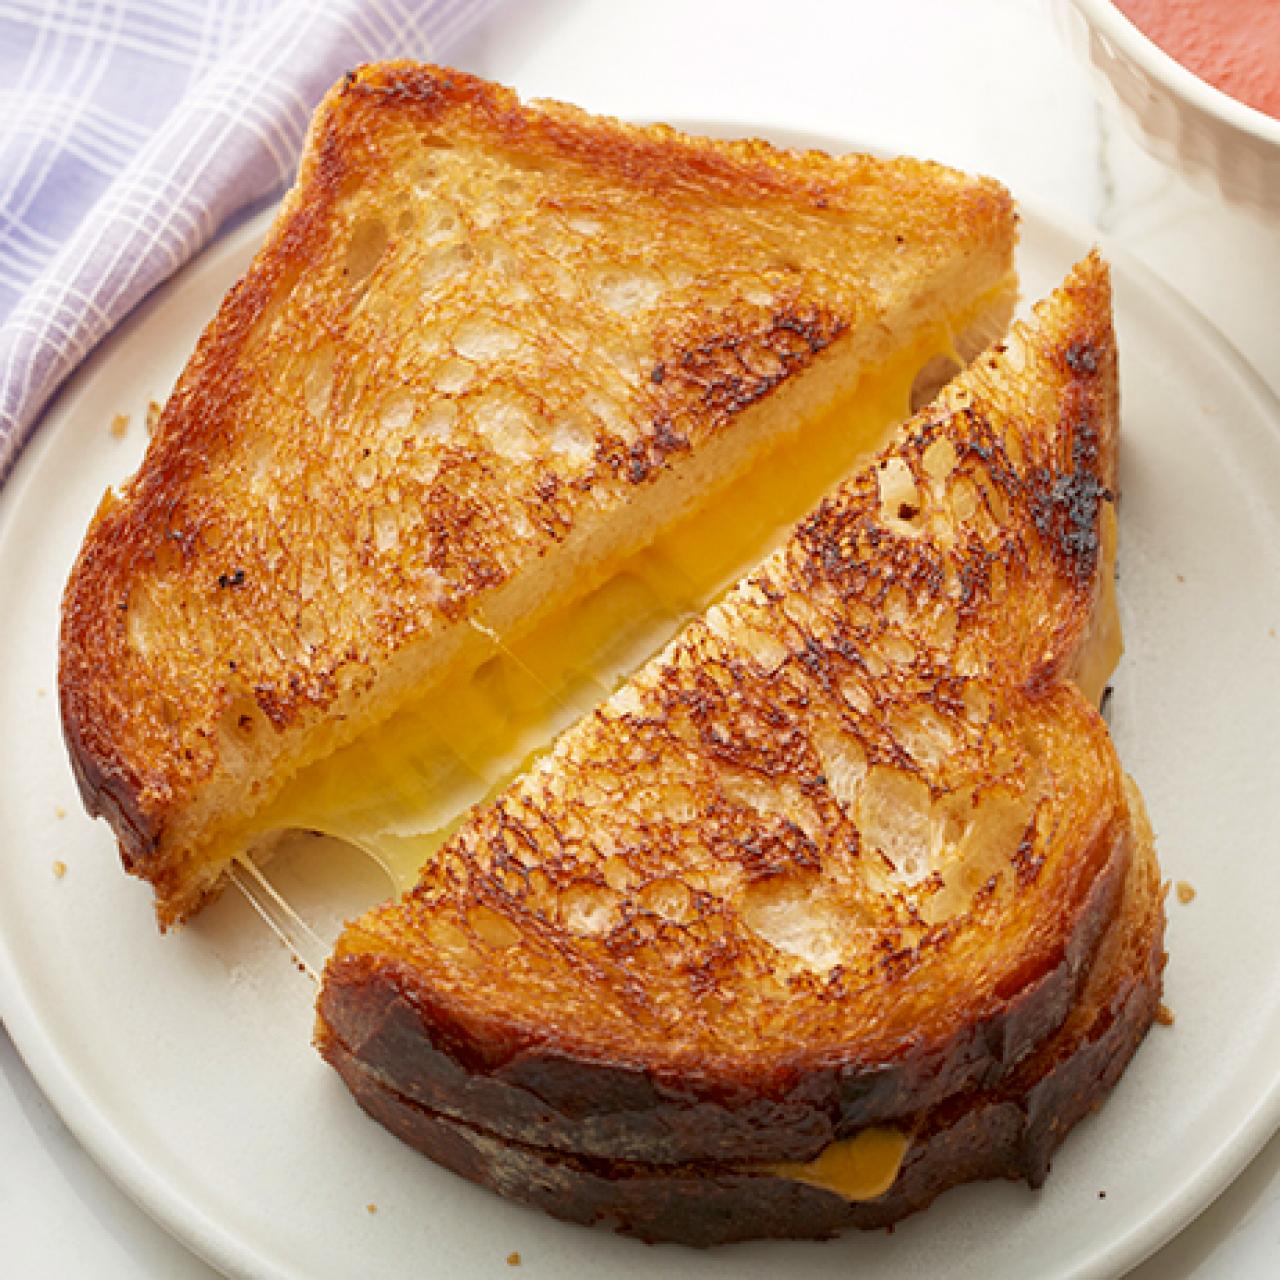 Classic grilled cheese Recipe - Los Angeles Times